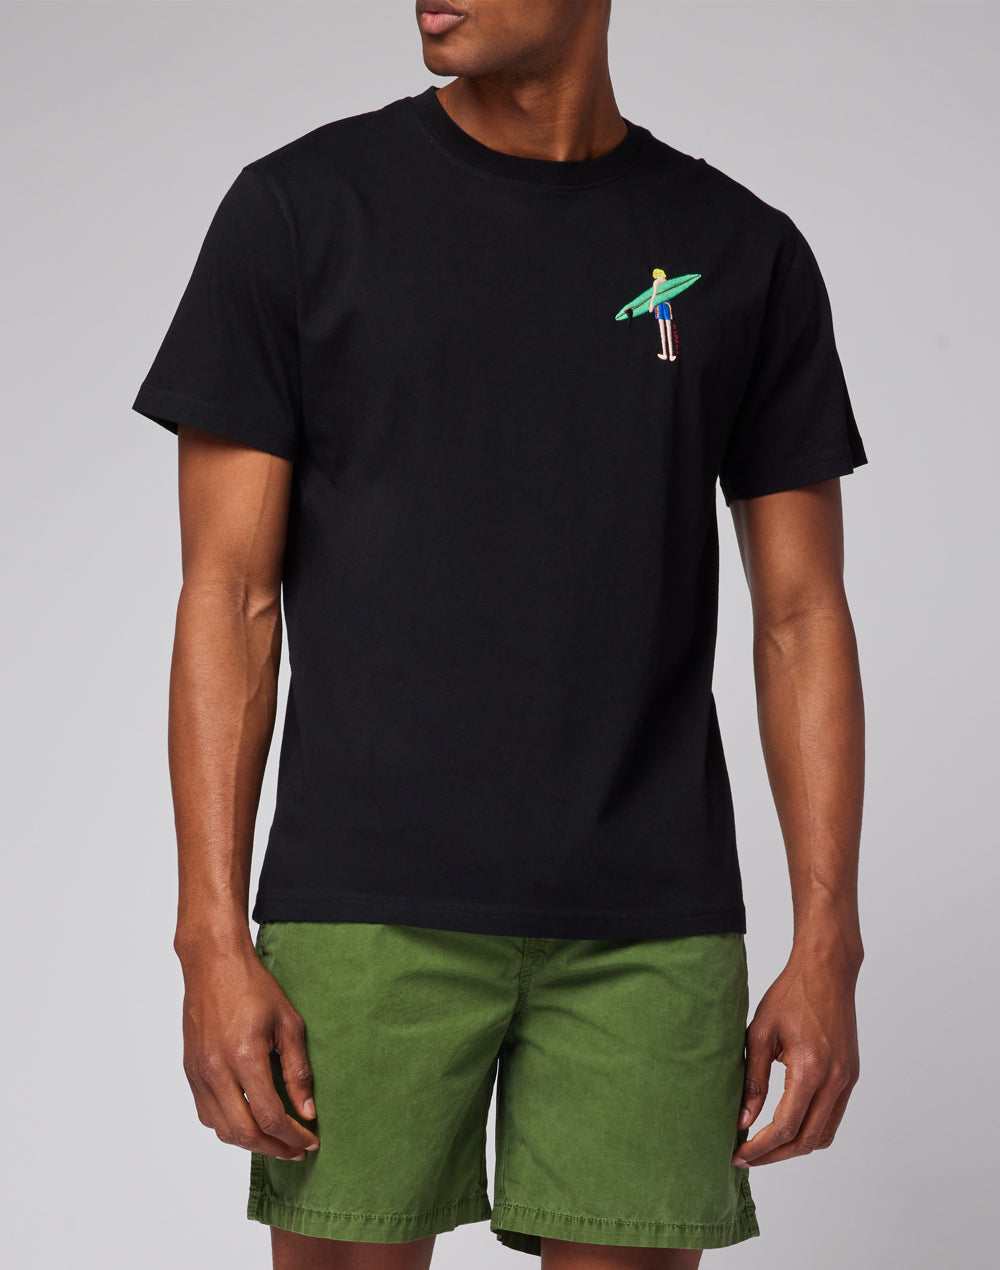 T-SHIRT CAPSULE EMBROIDERY SURFER